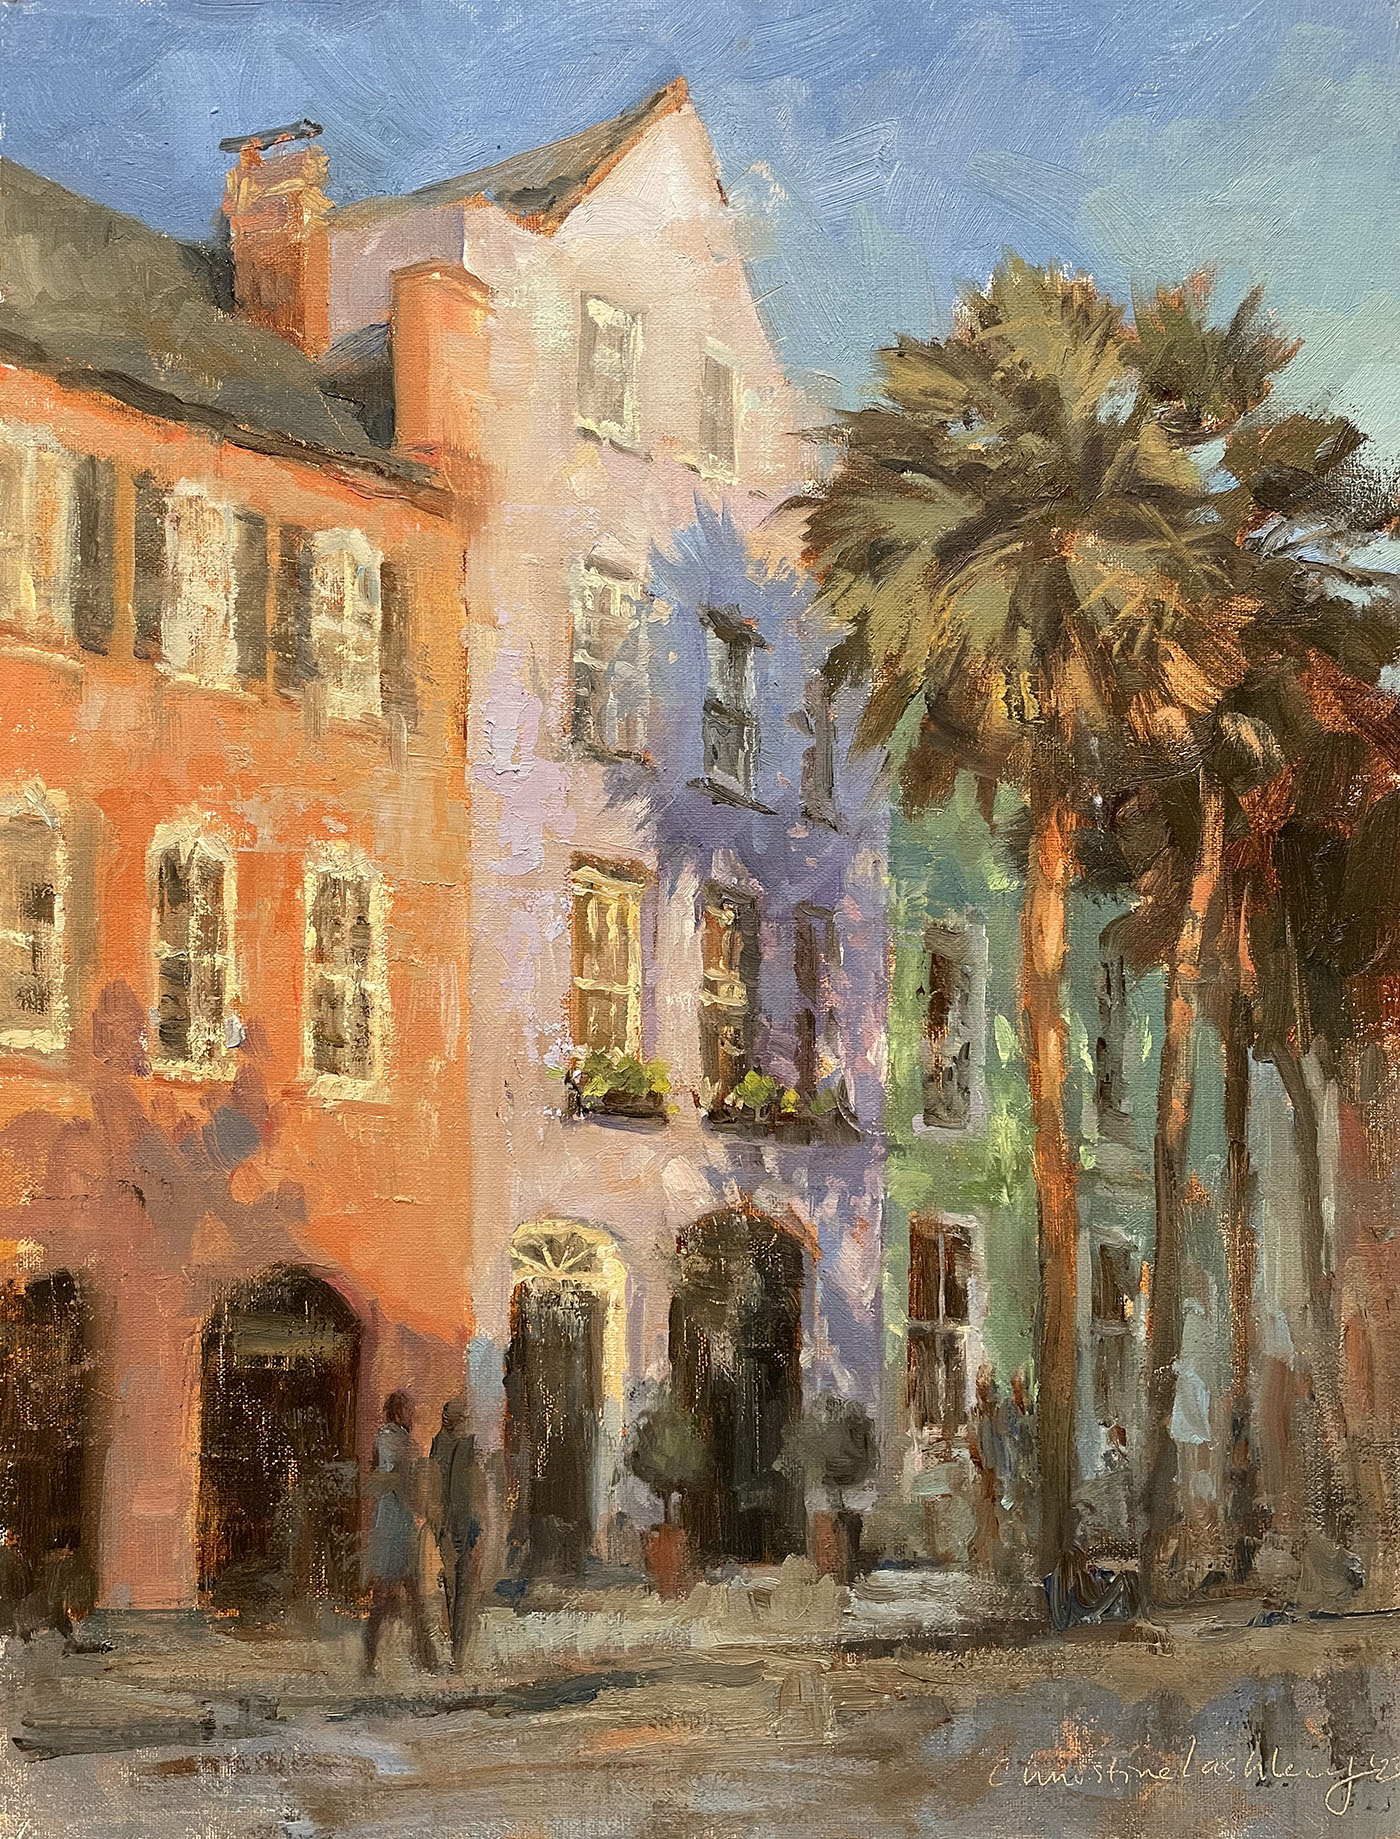 oil painting of sunset hitting buildings, making them different shades; palm tree on right side of image; pathway in foreground